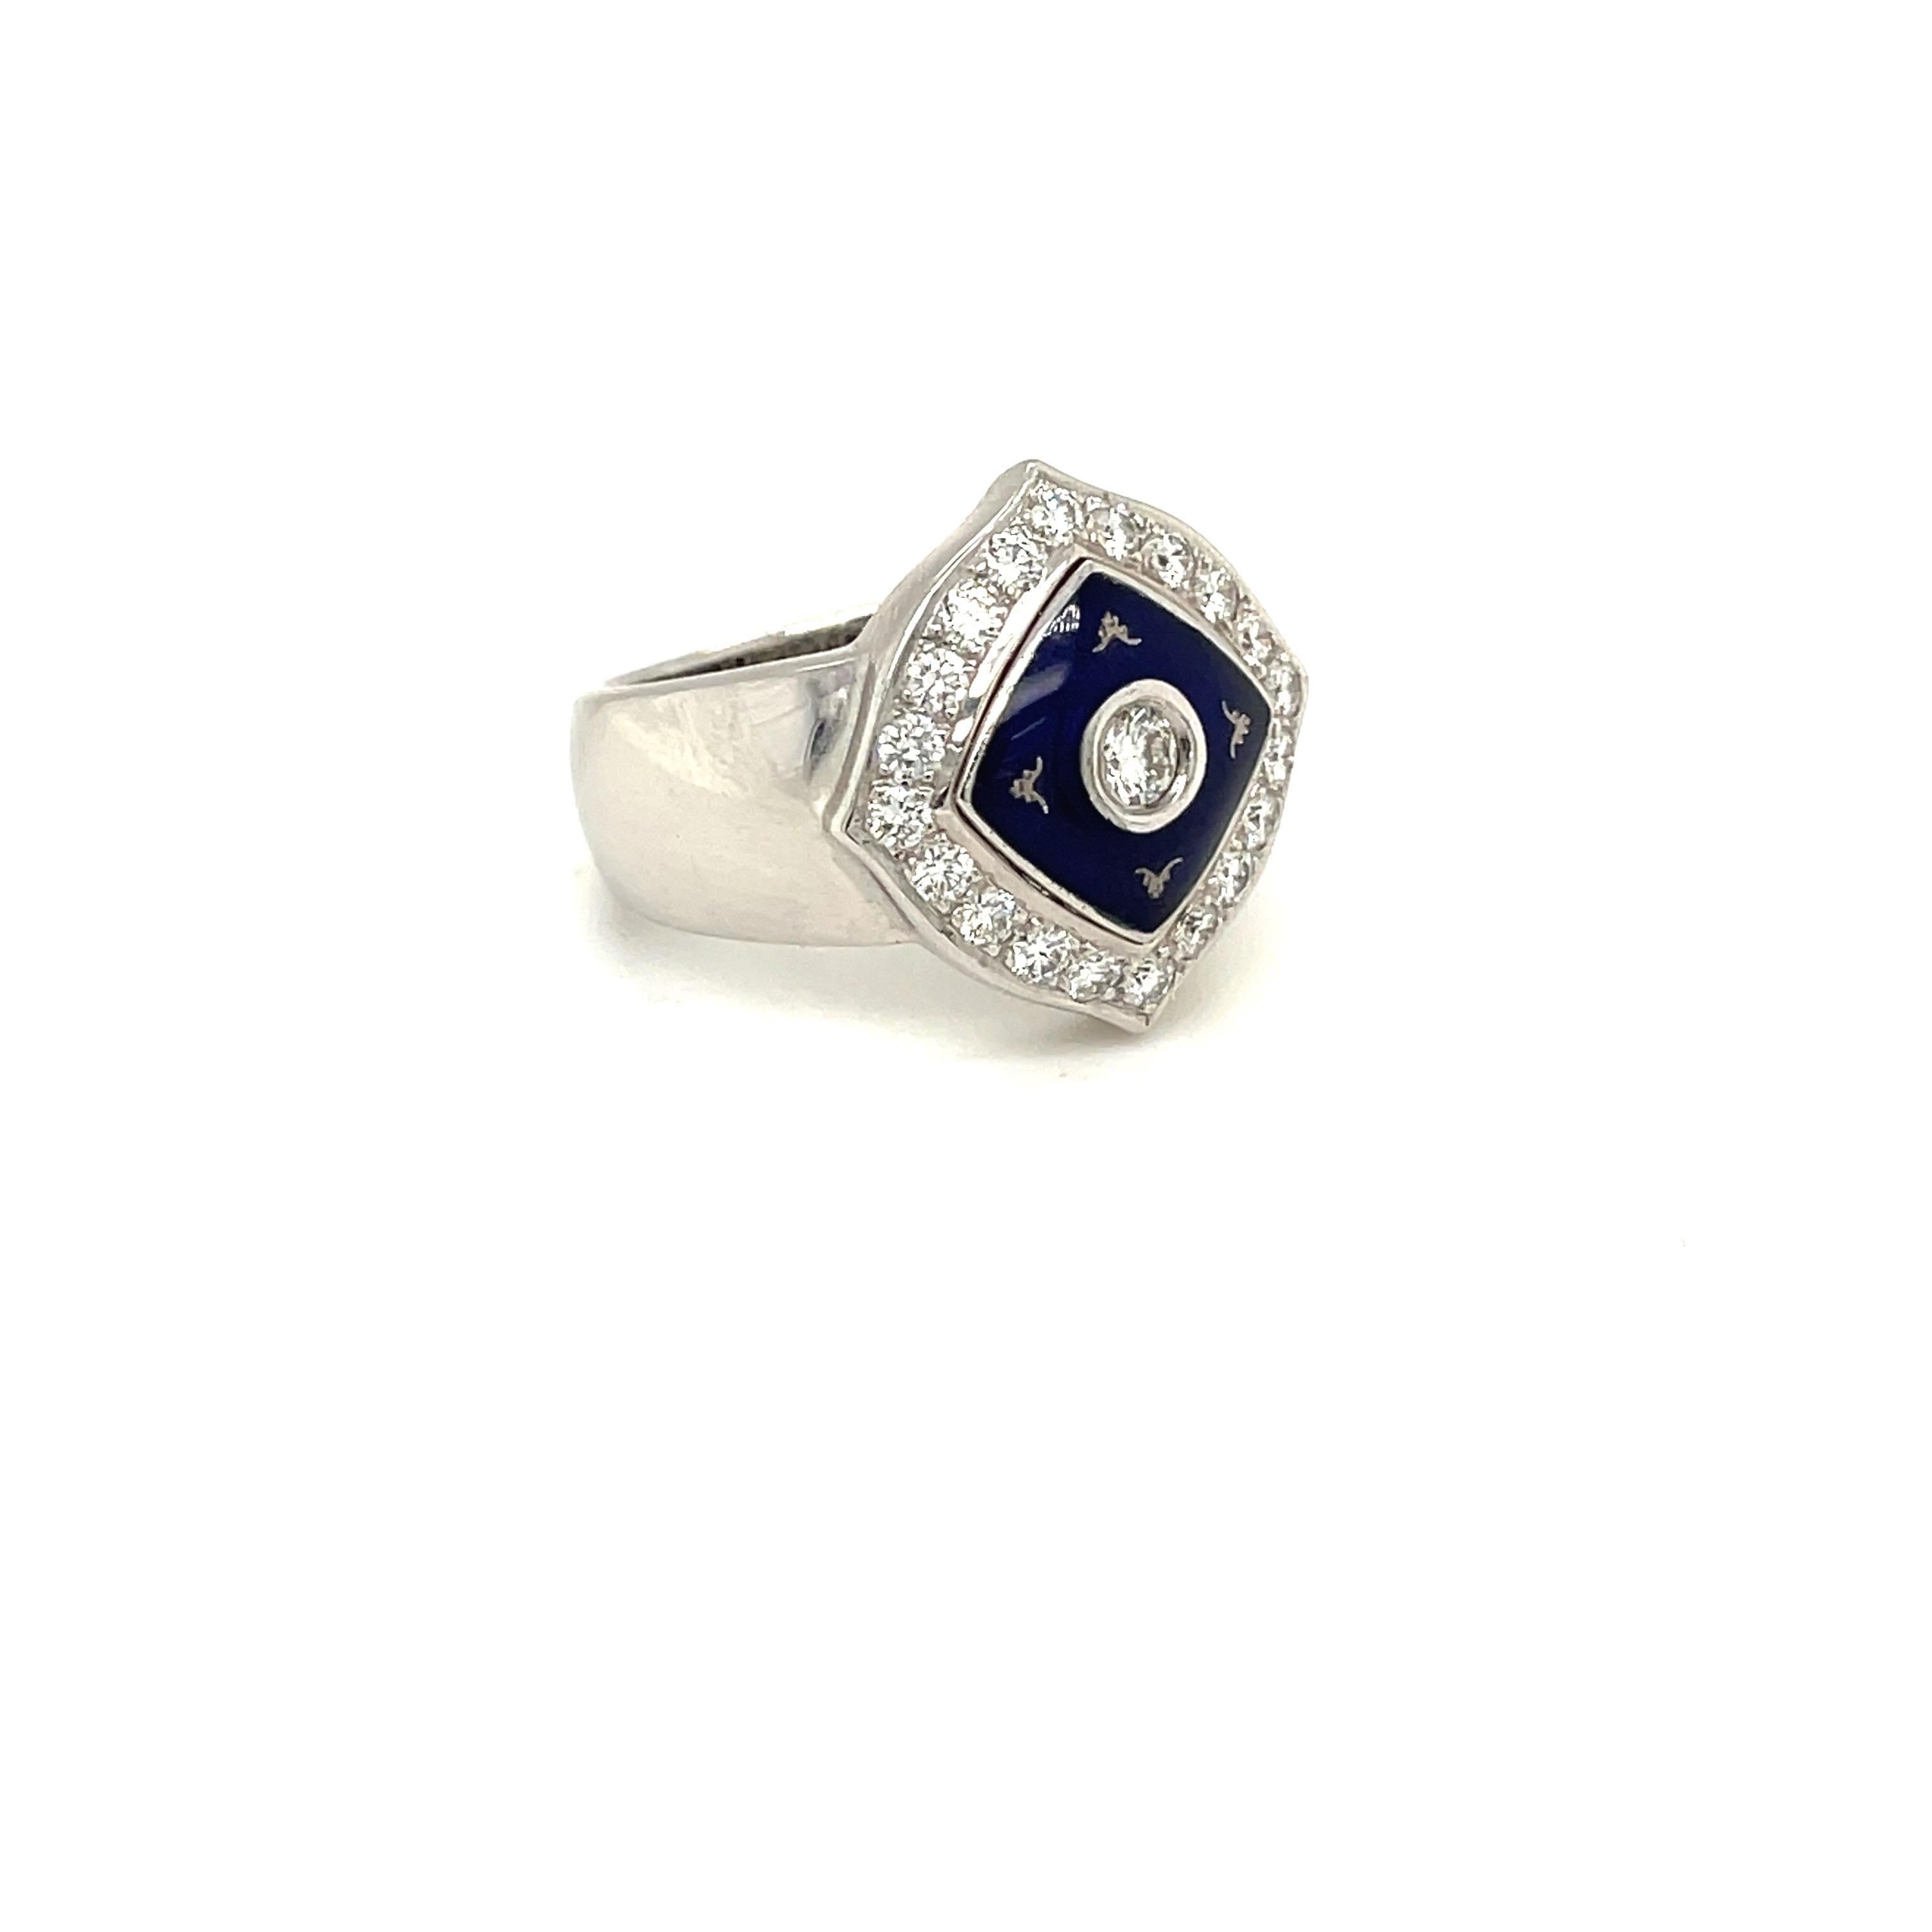 This modern Faberge 18 karat white gold cushion shaped ring centers a bezel set round brilliant diamond. A raised square of Prussian Blue enamel surrounds the center diamond. Round brilliant white diamonds border the entire ring.
The ring was